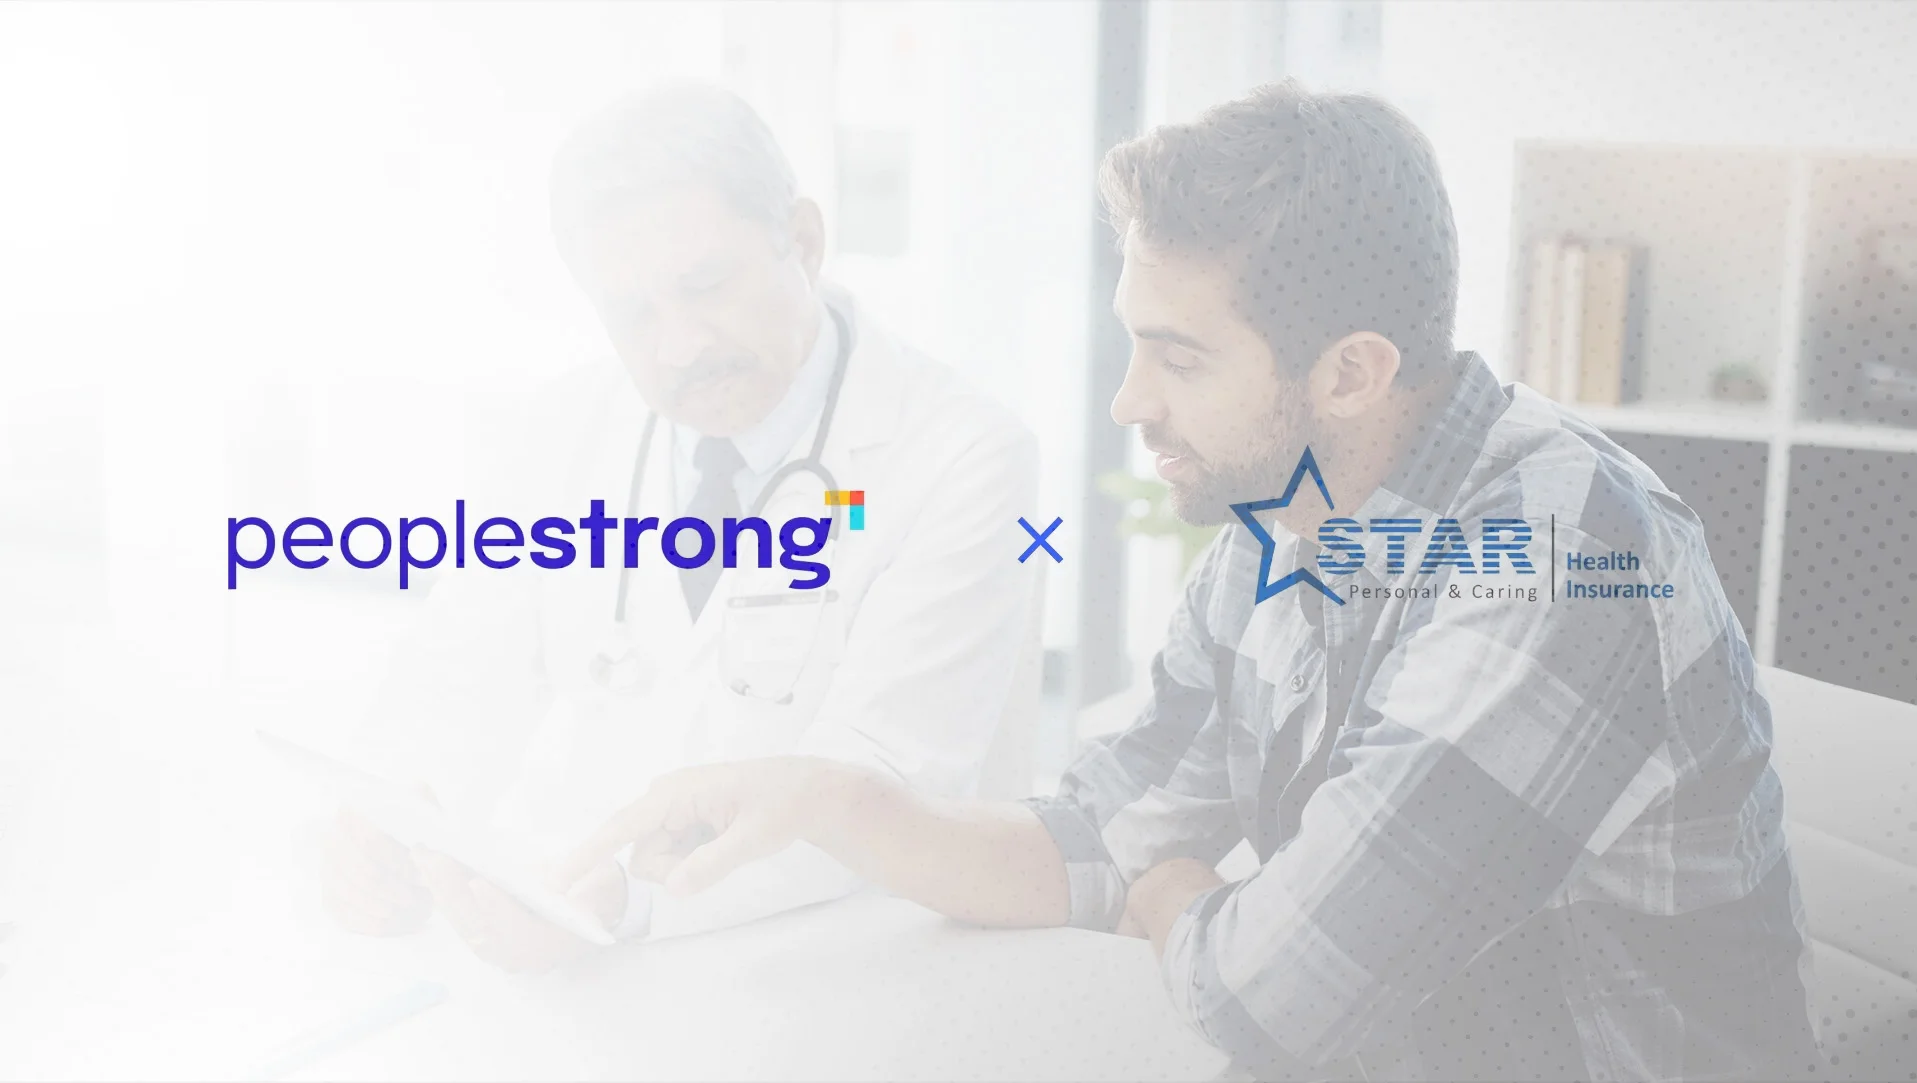 work/Work_Peoplestrong_Star_Healthcare__Vaakcreatives_Client_Testimonial_video-Recovered_1.webp